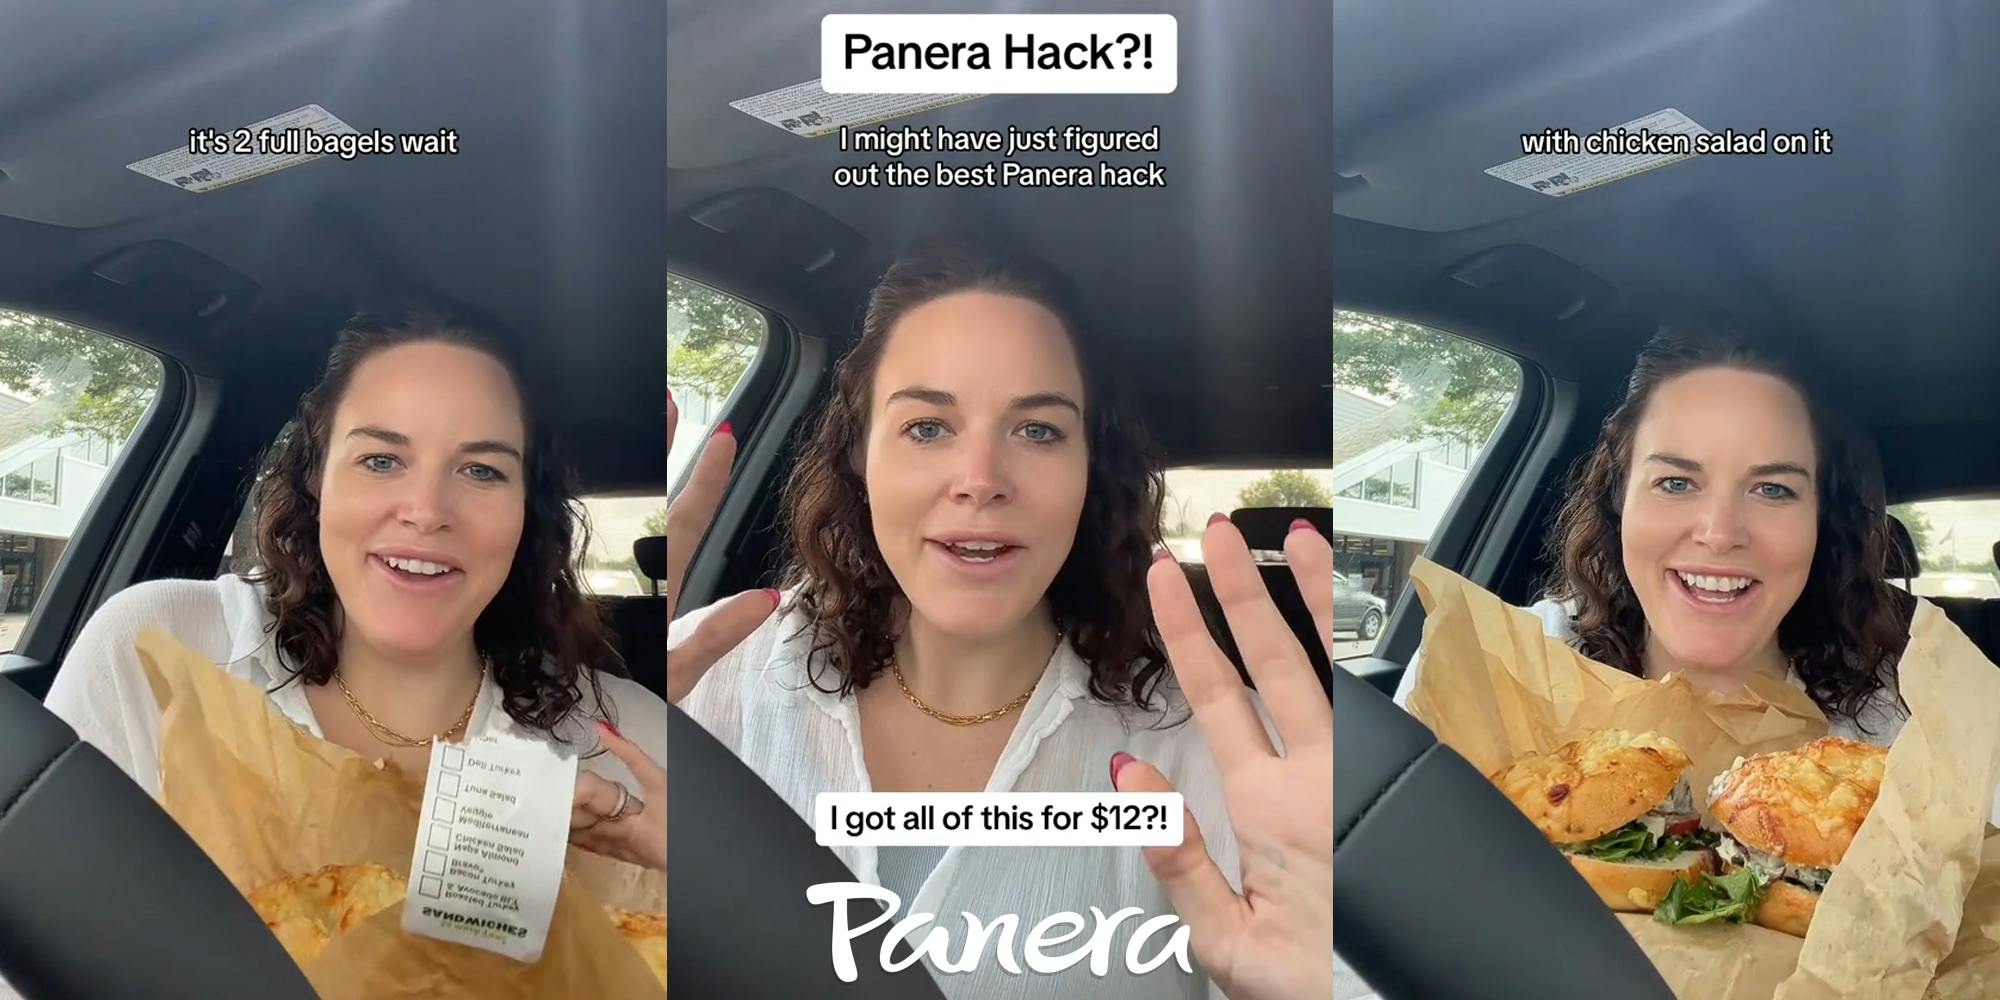 Panera customer speaking in car with caption "it's 2 full bagels wait" (l) Panera customer speaking in car with caption "Panera Hack?! I might have just figured out the best Panera hack I got all of this for $12?!" with Panera logo at bottom (c) Panera customer speaking in car with caption "with chicken salad on it" (r)